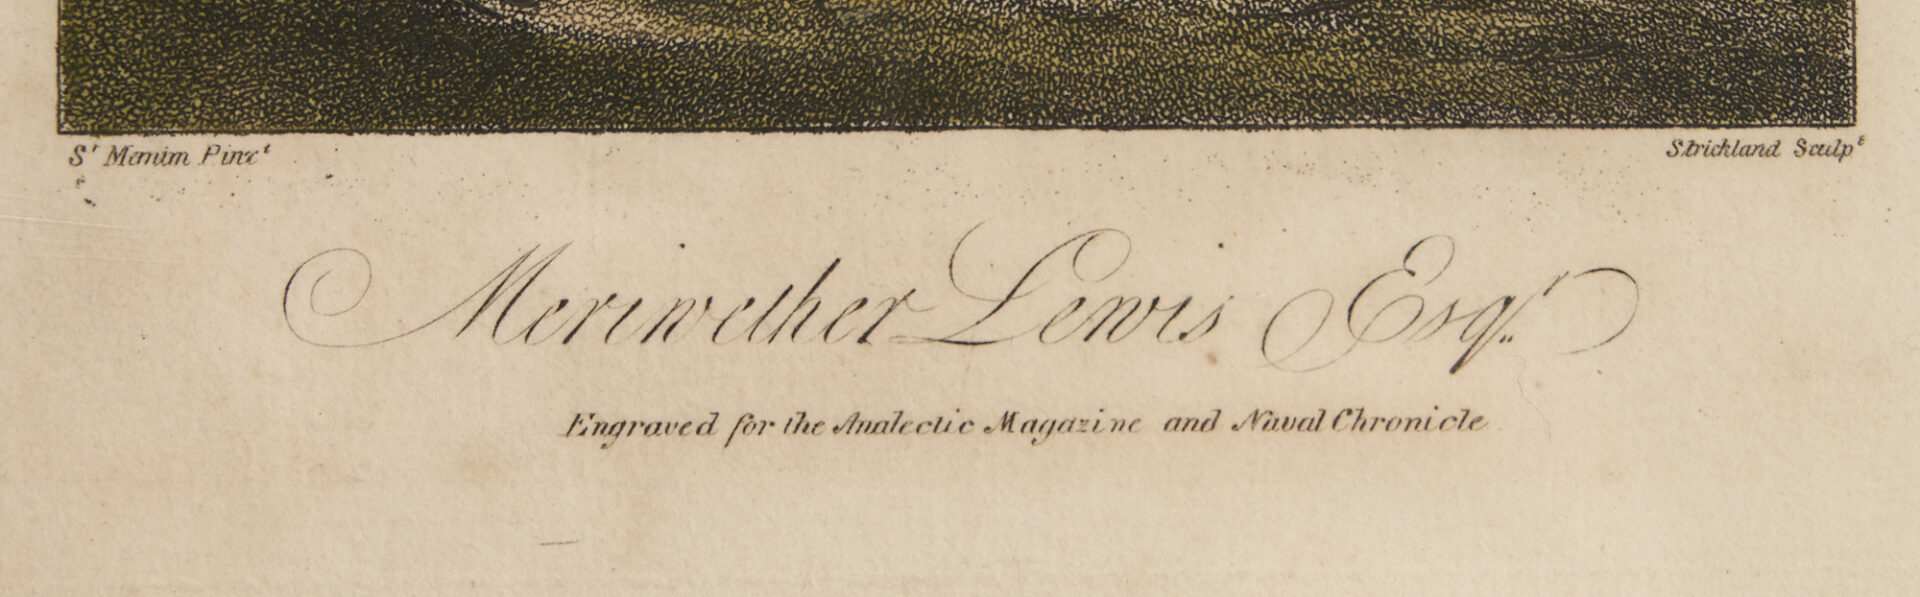 Lot 595: 10 Early Prints including Meriwether Lewis, Native American VA Portrait